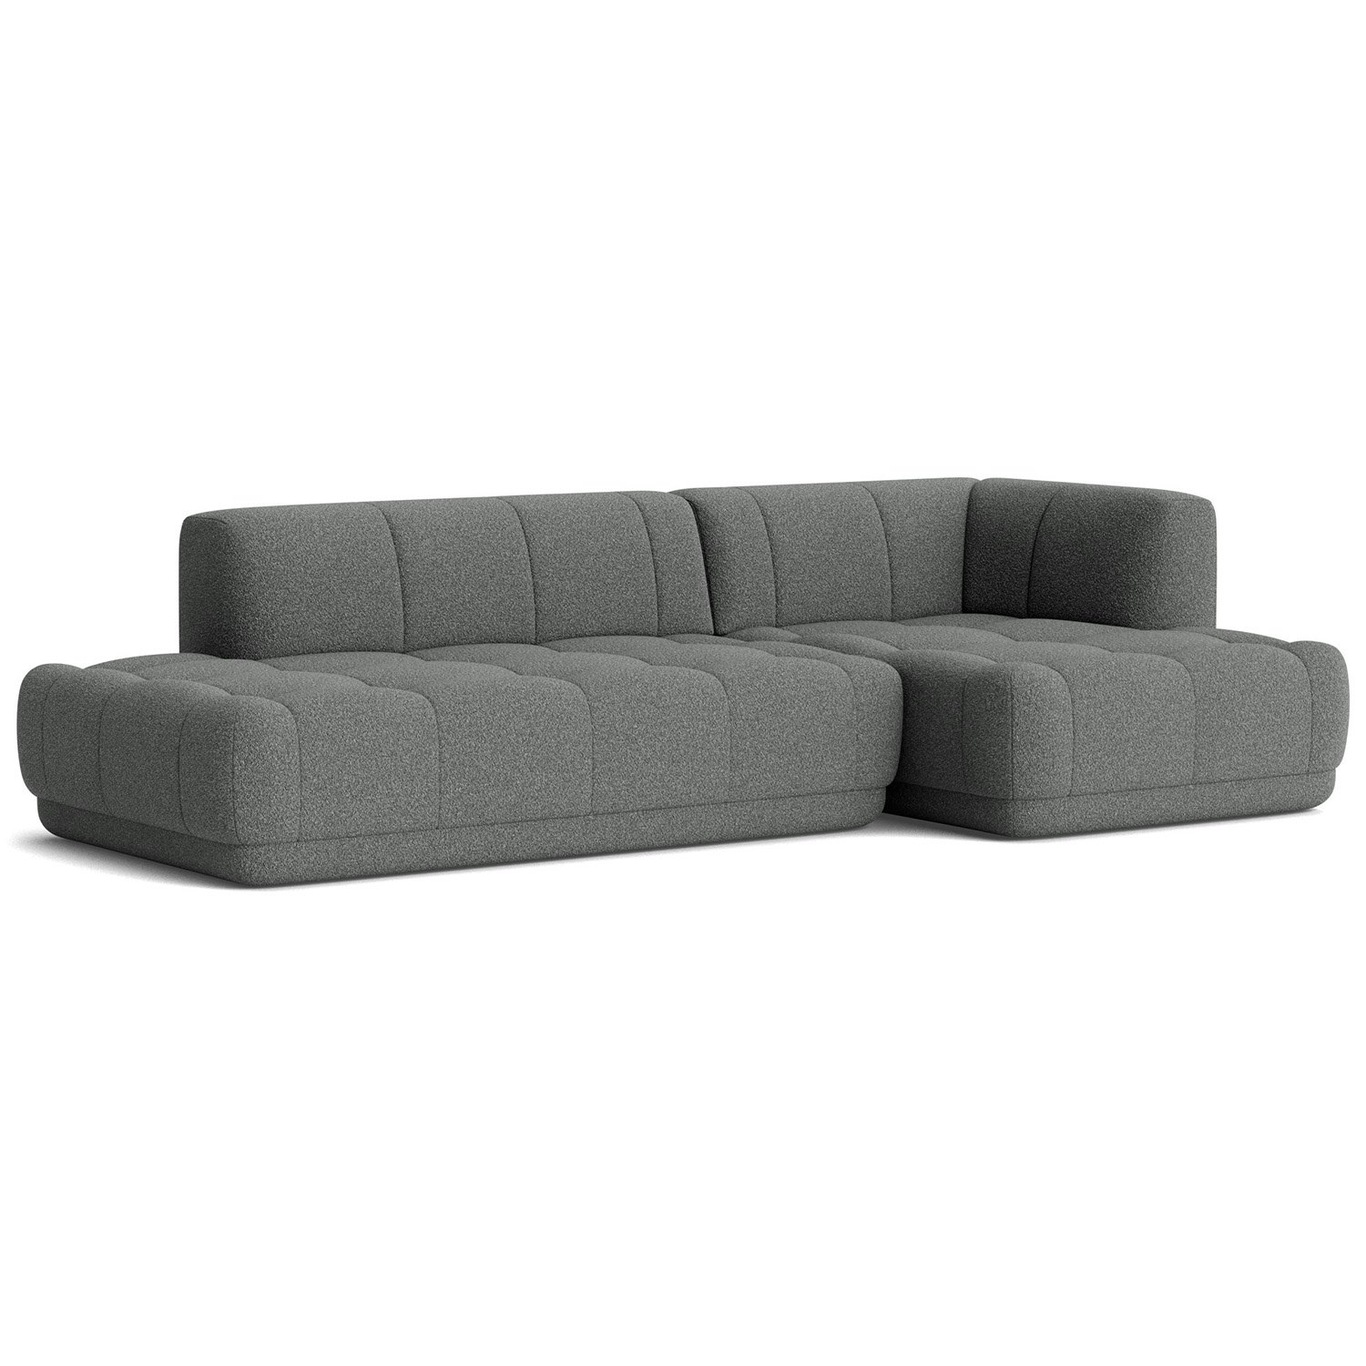 Quilton 3.5-Seater Sofa Configuration 21 Right, Flamiber C8 Charcoal